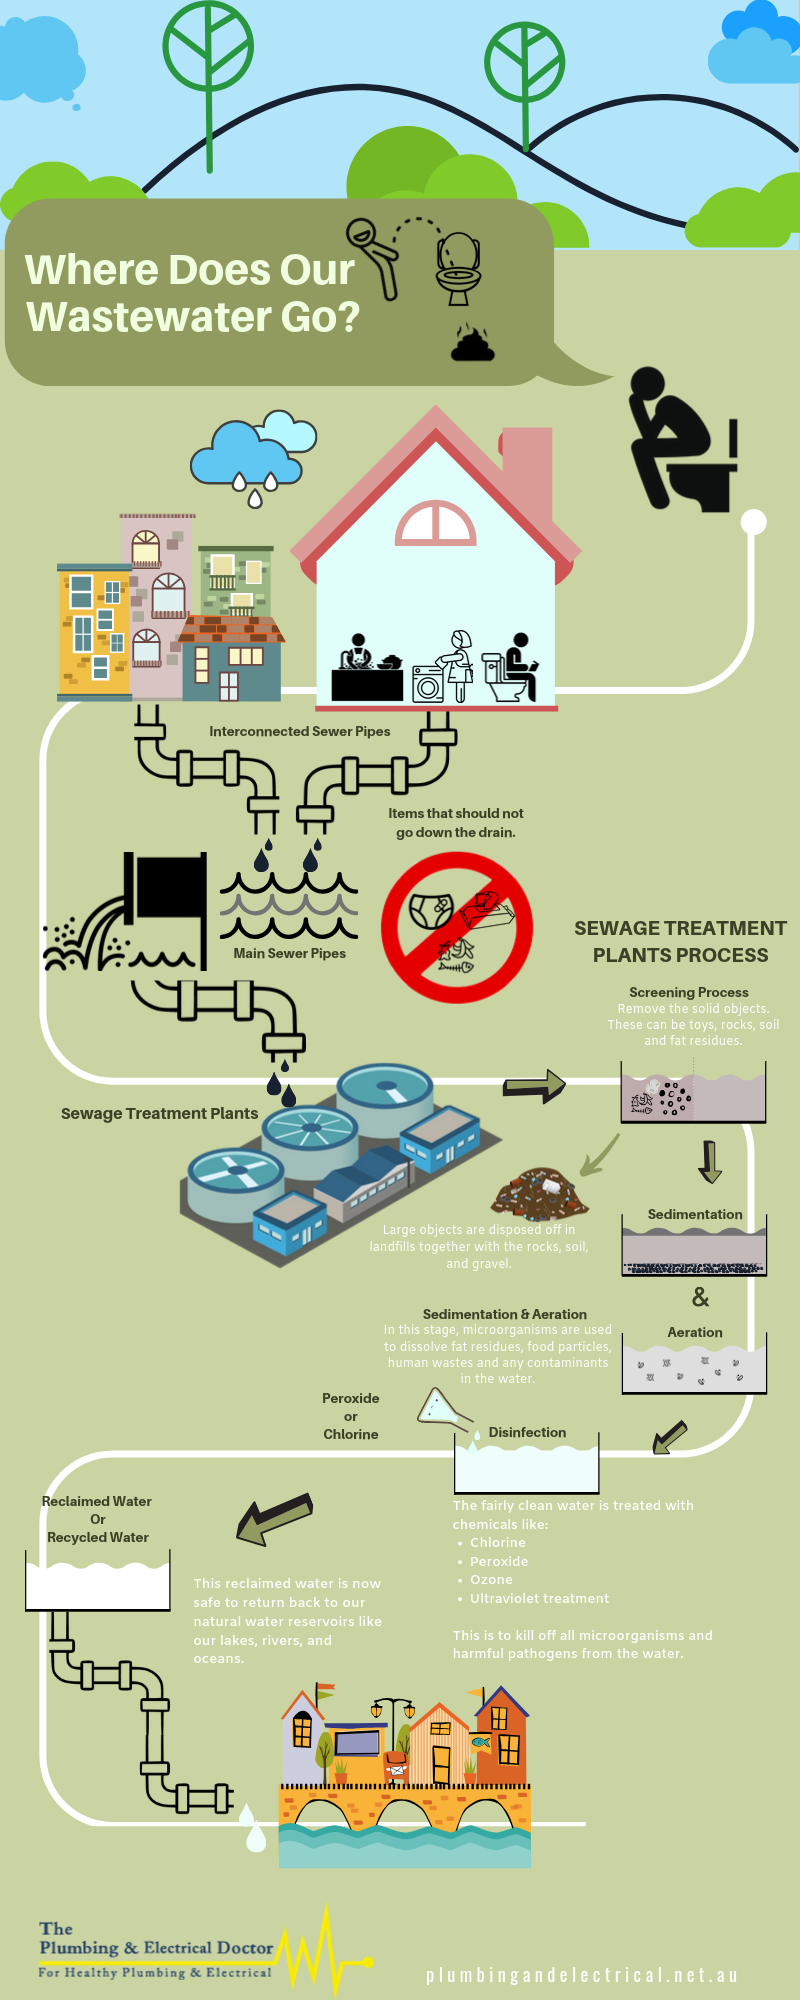 Wastewater: Where does it go? 